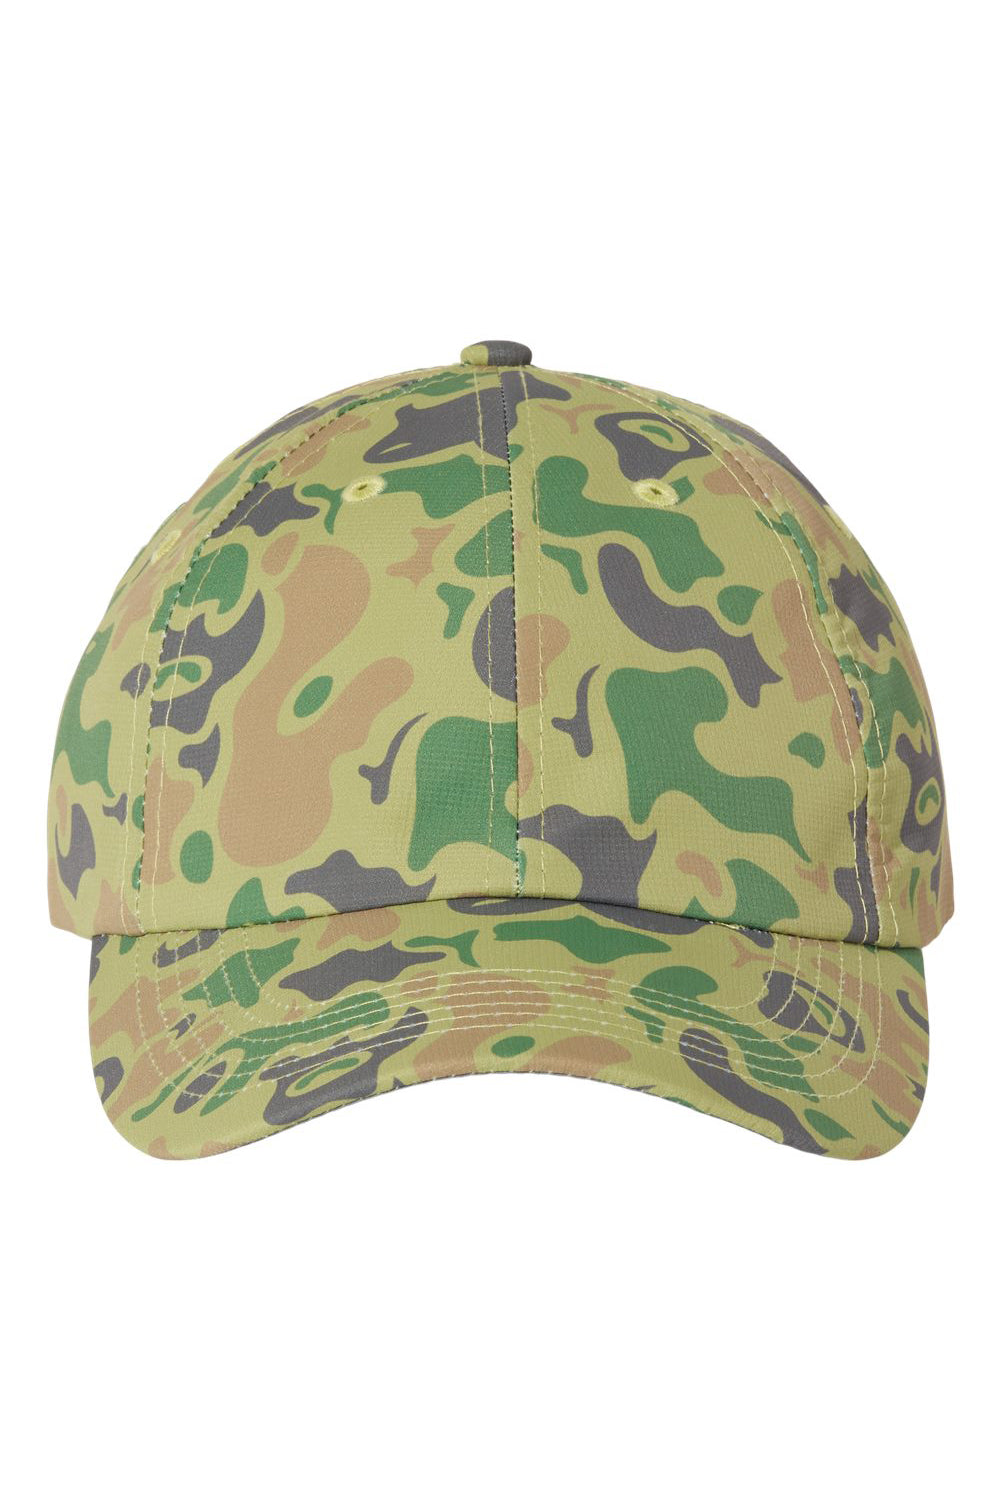 Imperial X210R Mens Alter Ego Hat Green Duck Camo Flat Front